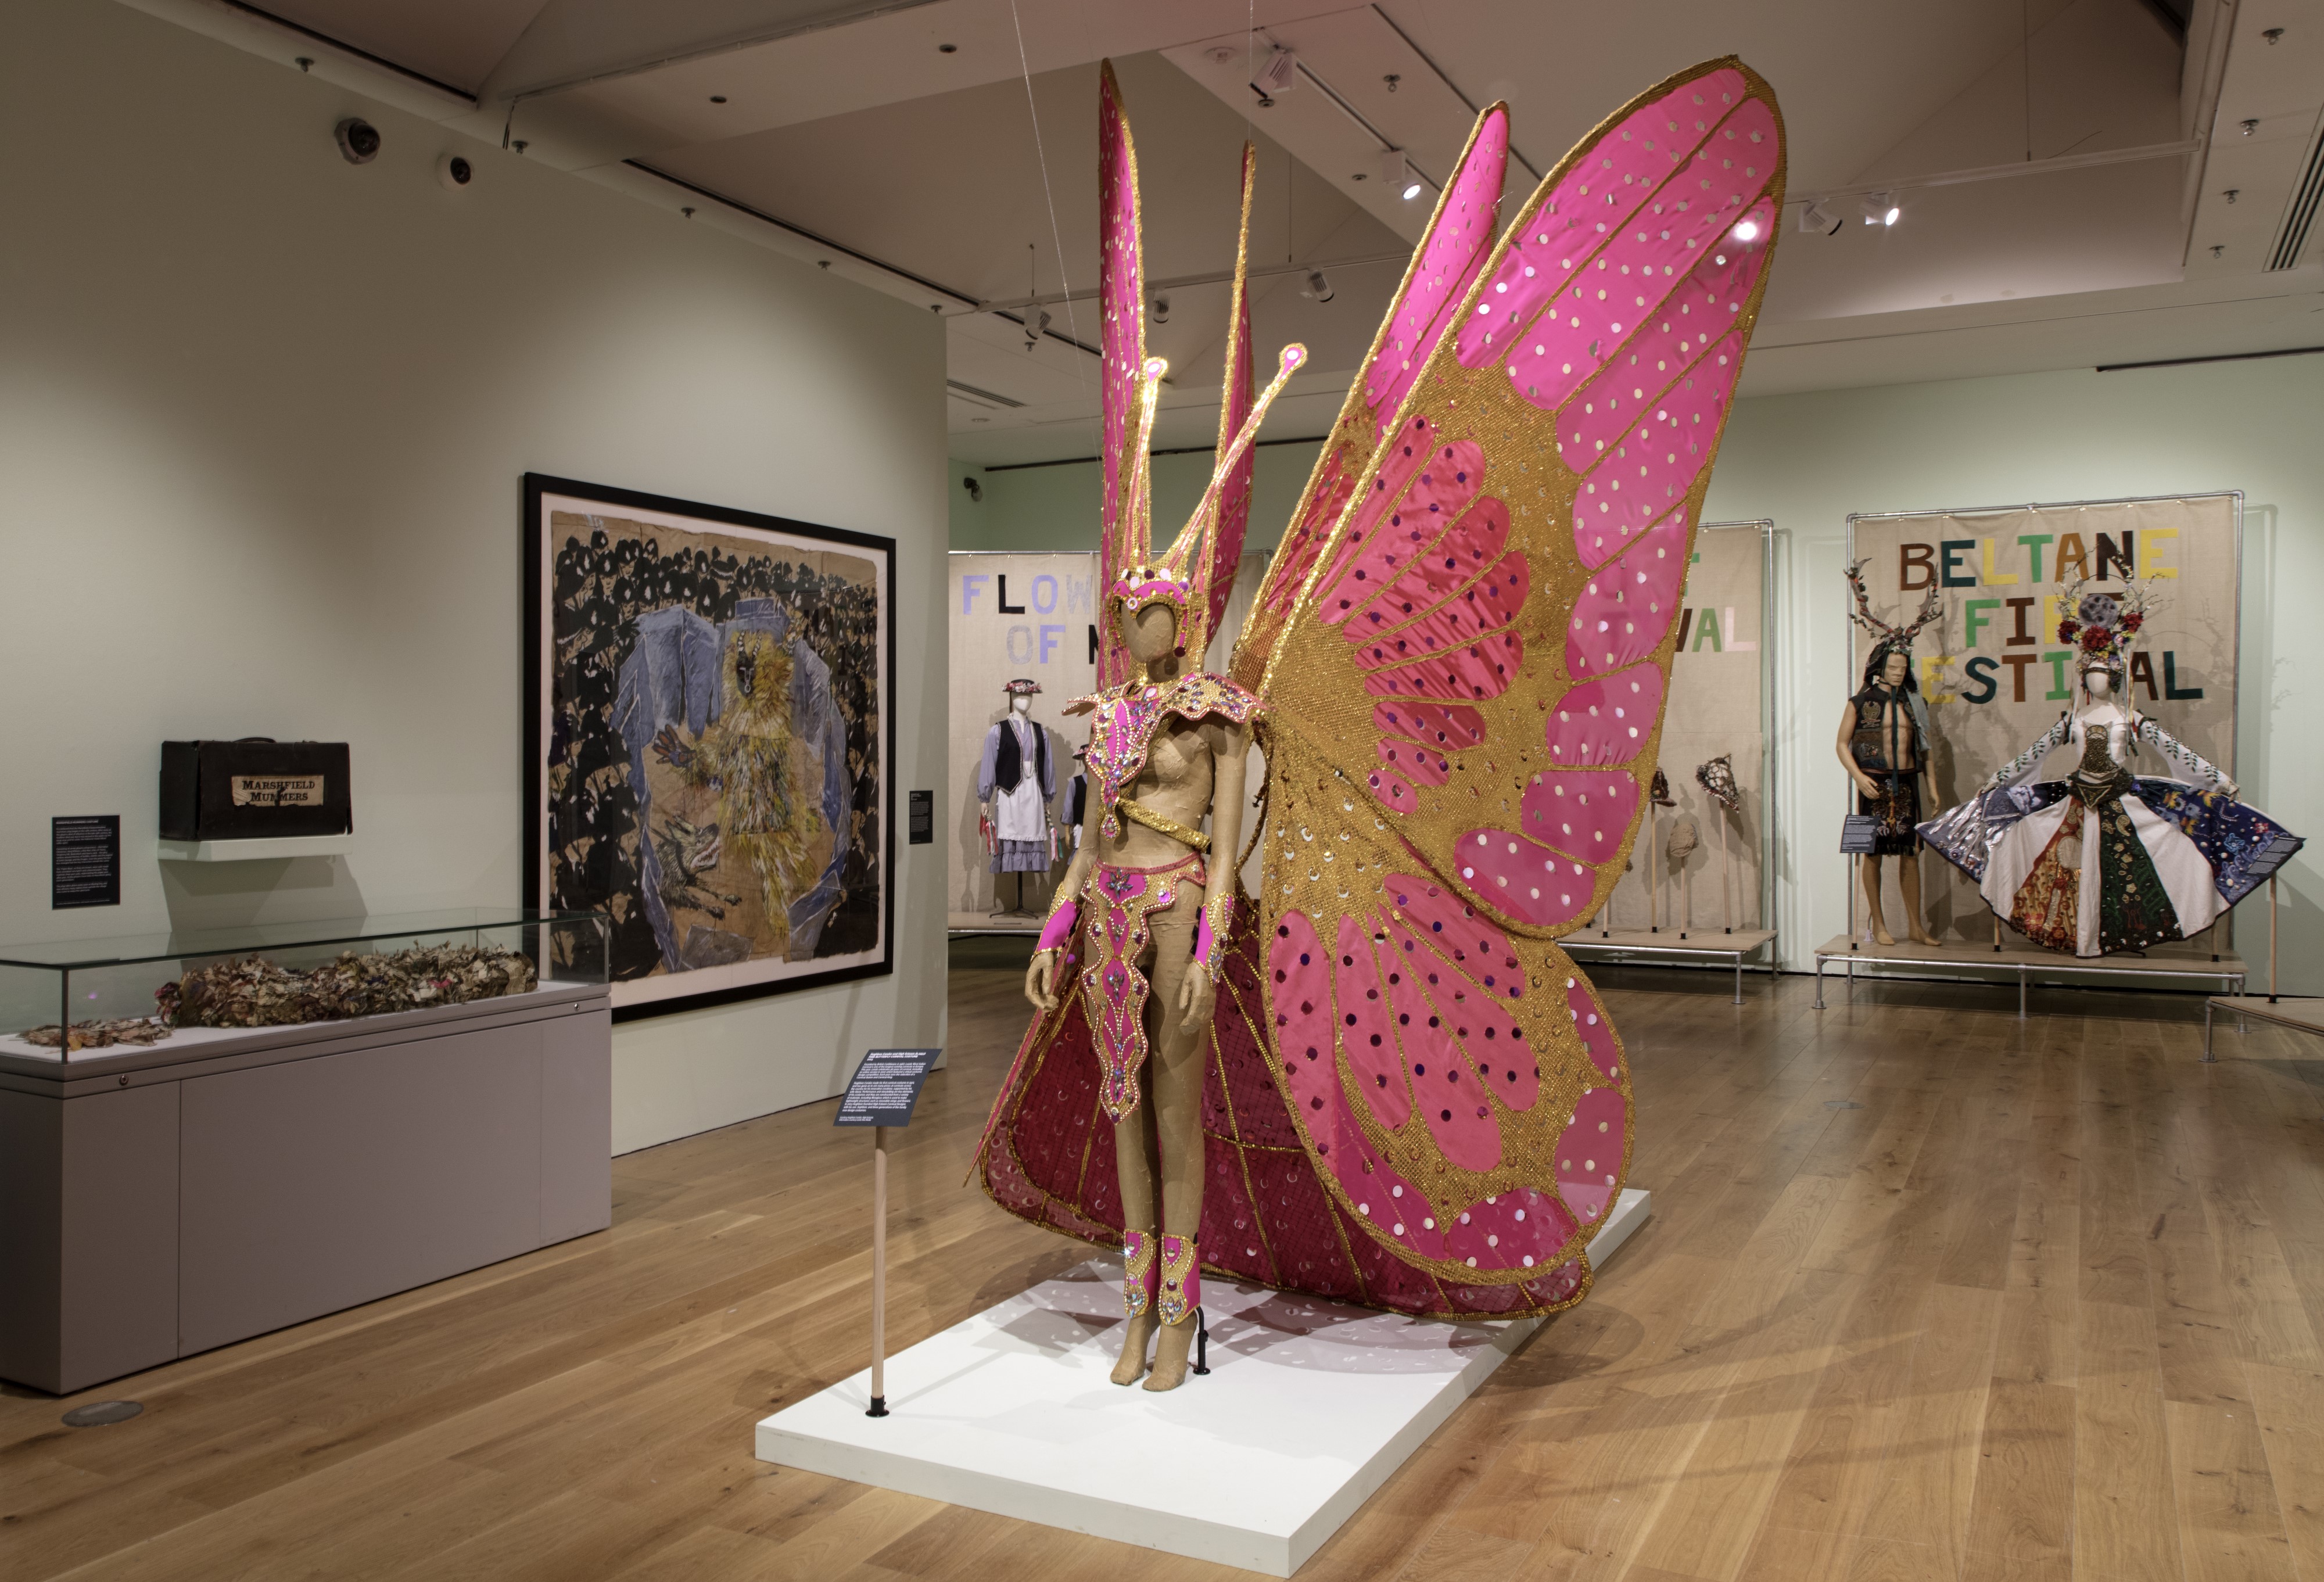 Flamboyant pink butterfly Leeds Carnival Costume in gallery